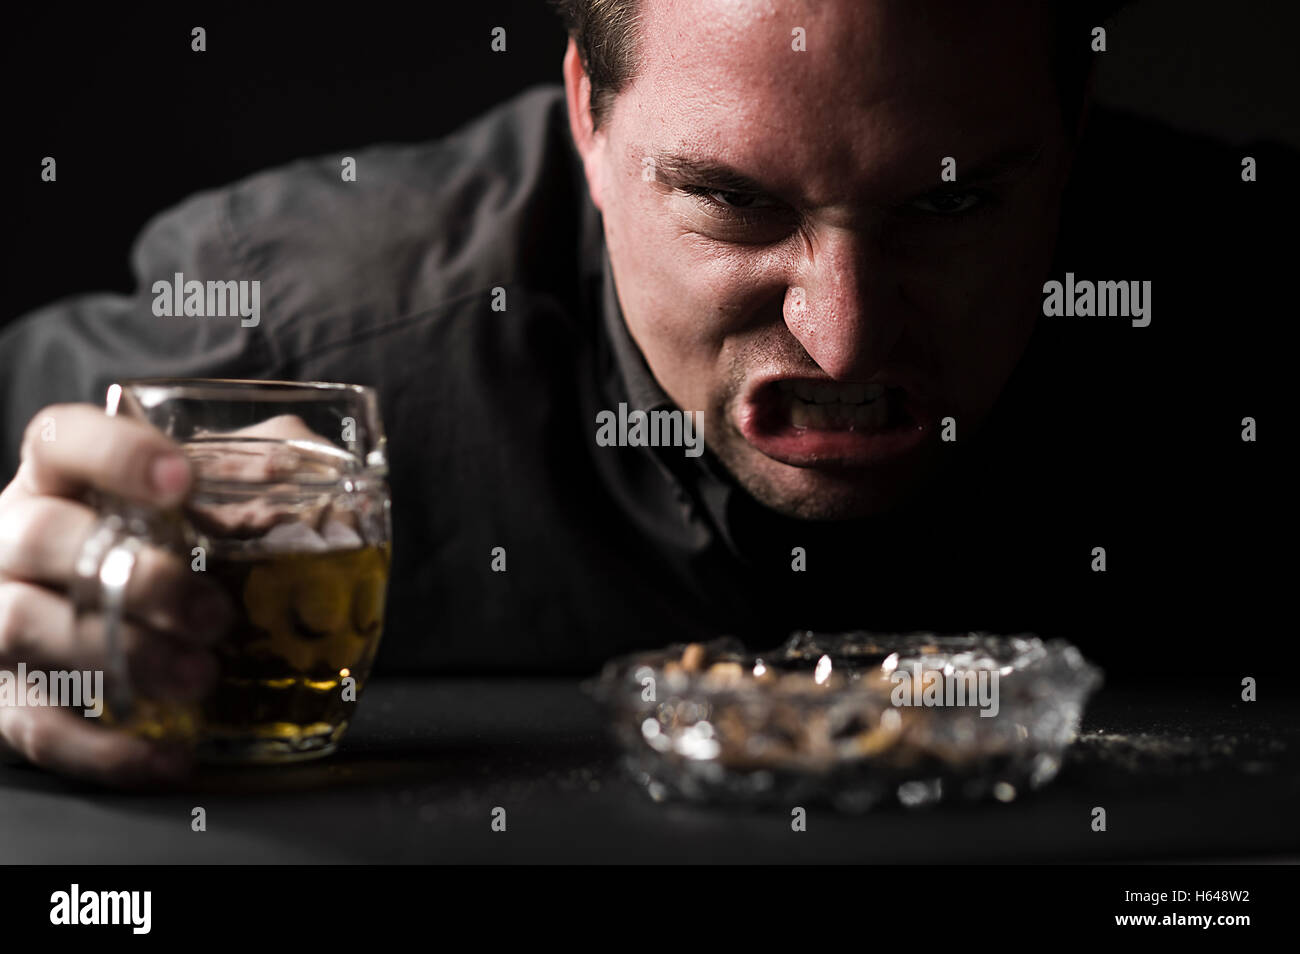 Aggressive man with beer Stock Photo